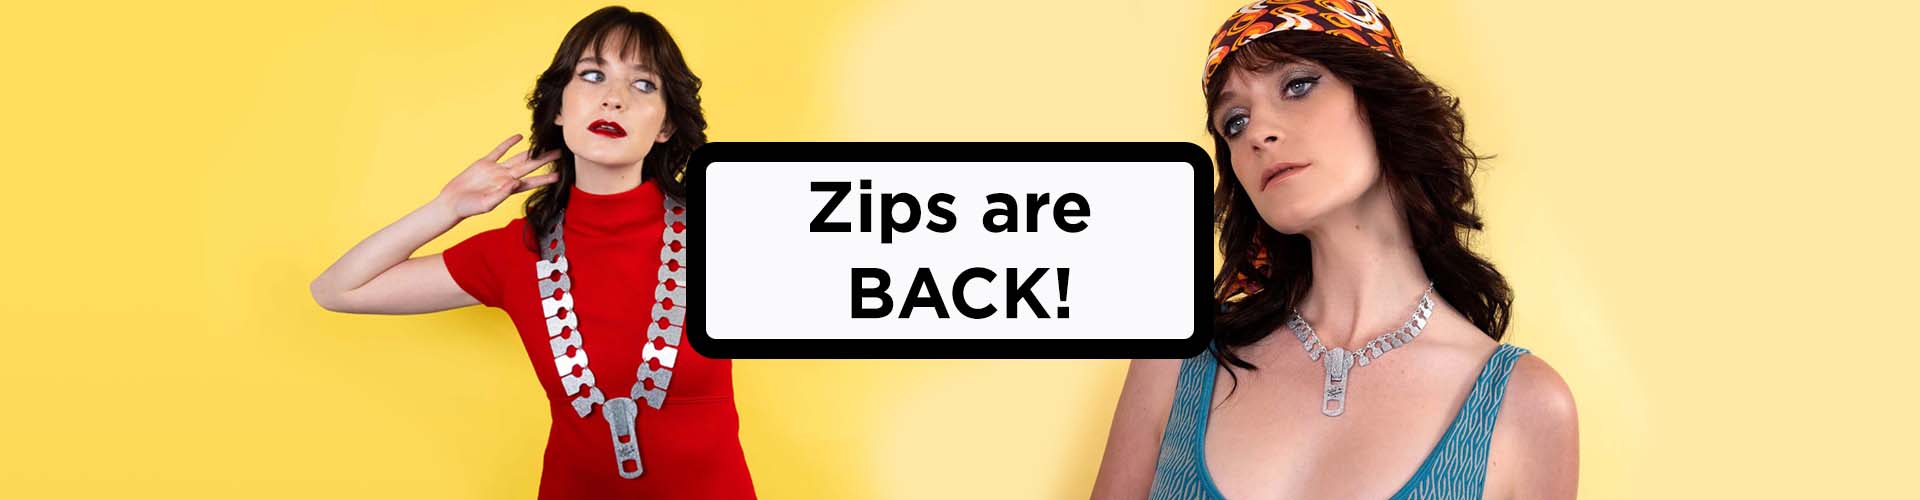 Zips are BACK!